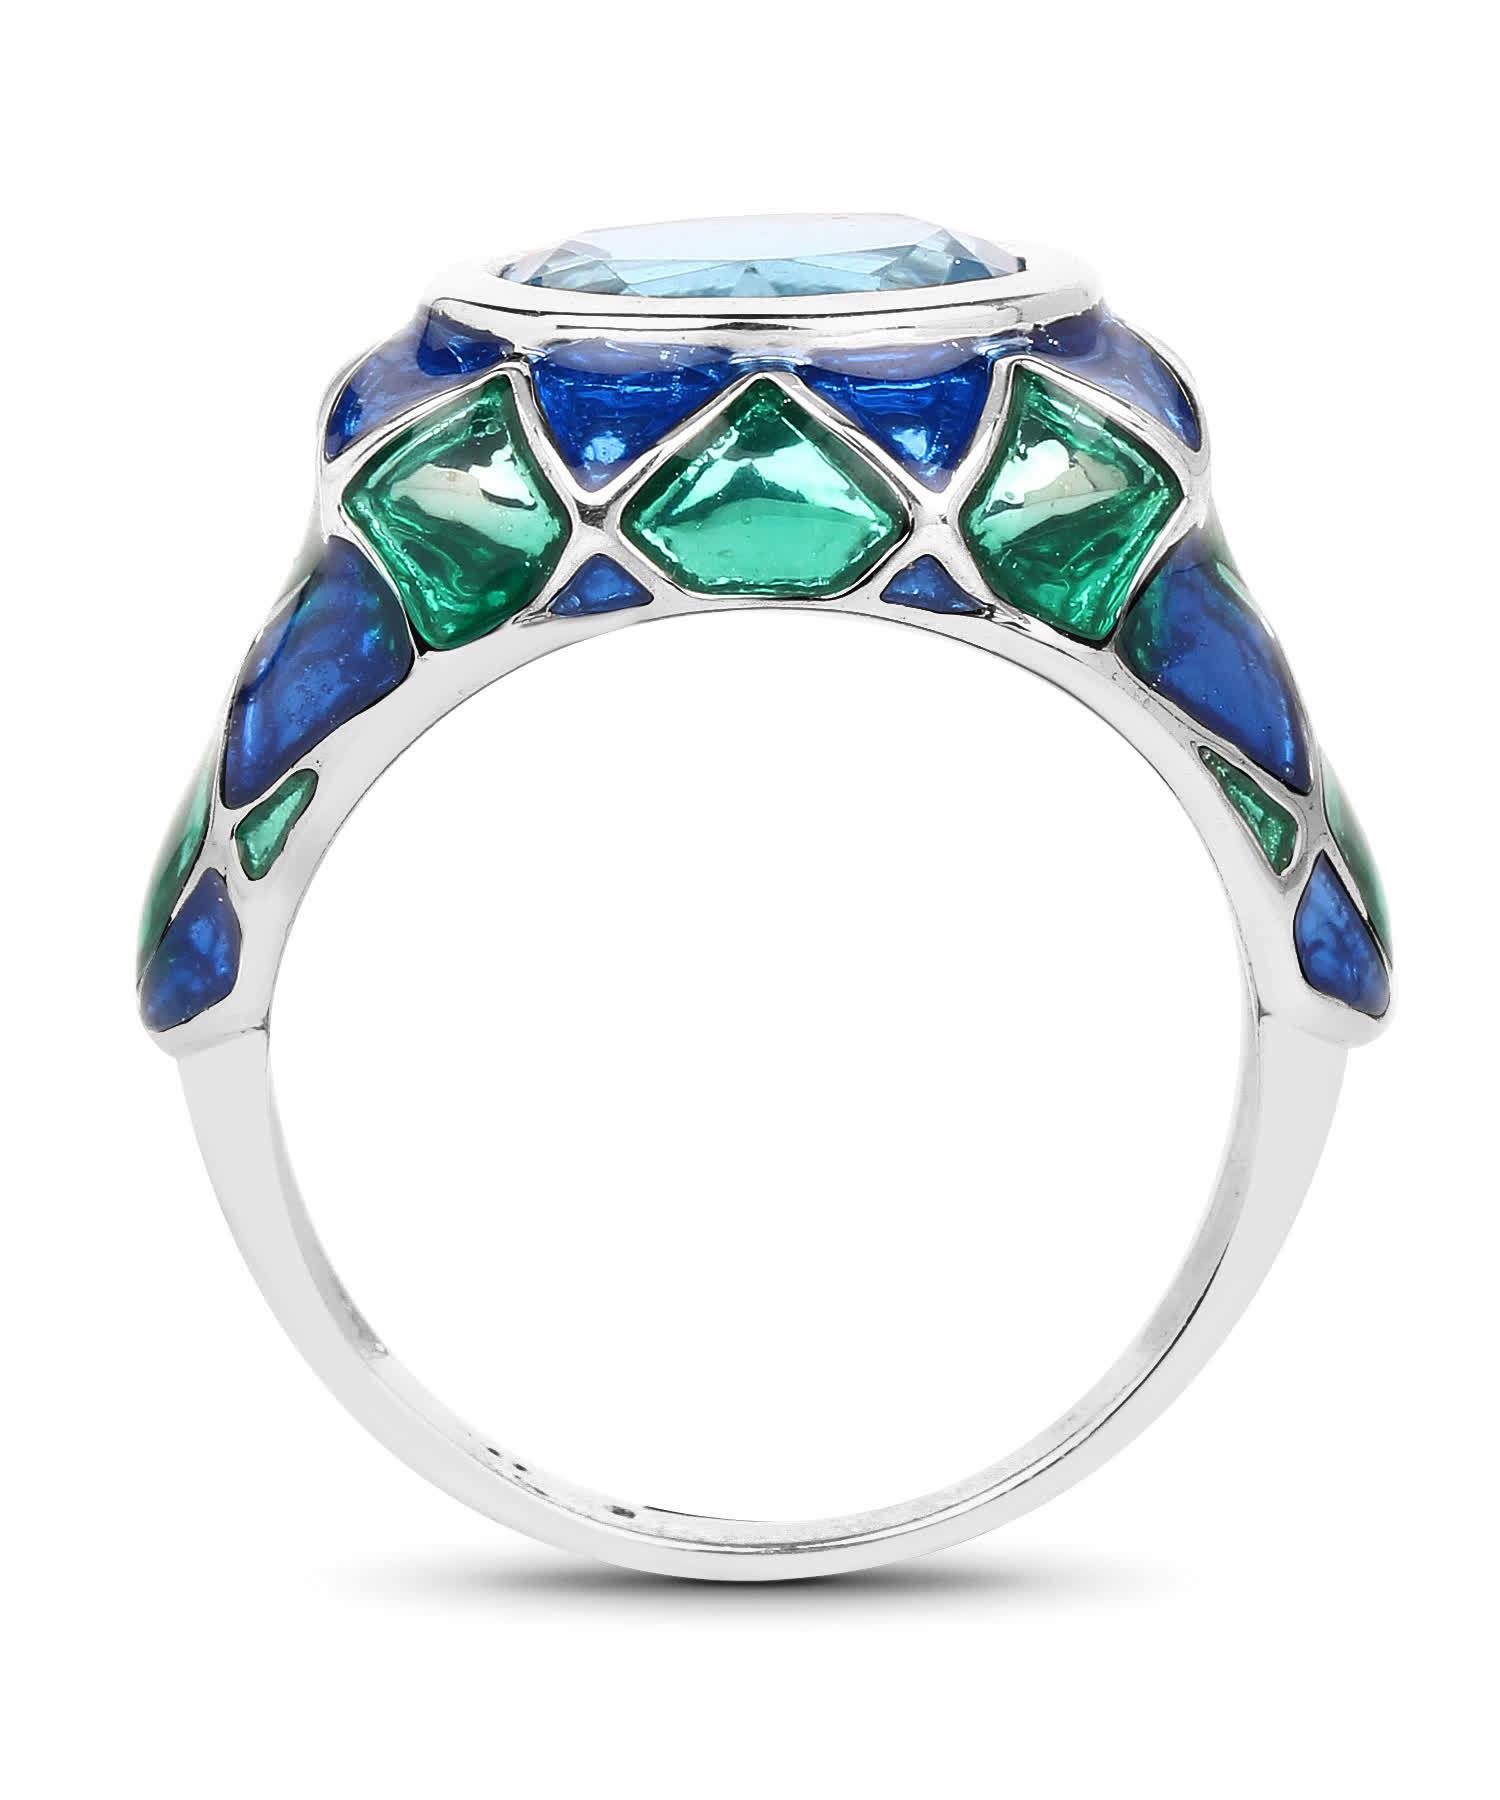 3.25ctw Natural Swiss Blue Topaz Rhodium Plated 925 Sterling Silver Cocktail Ring - With Enamel Inlay View 2